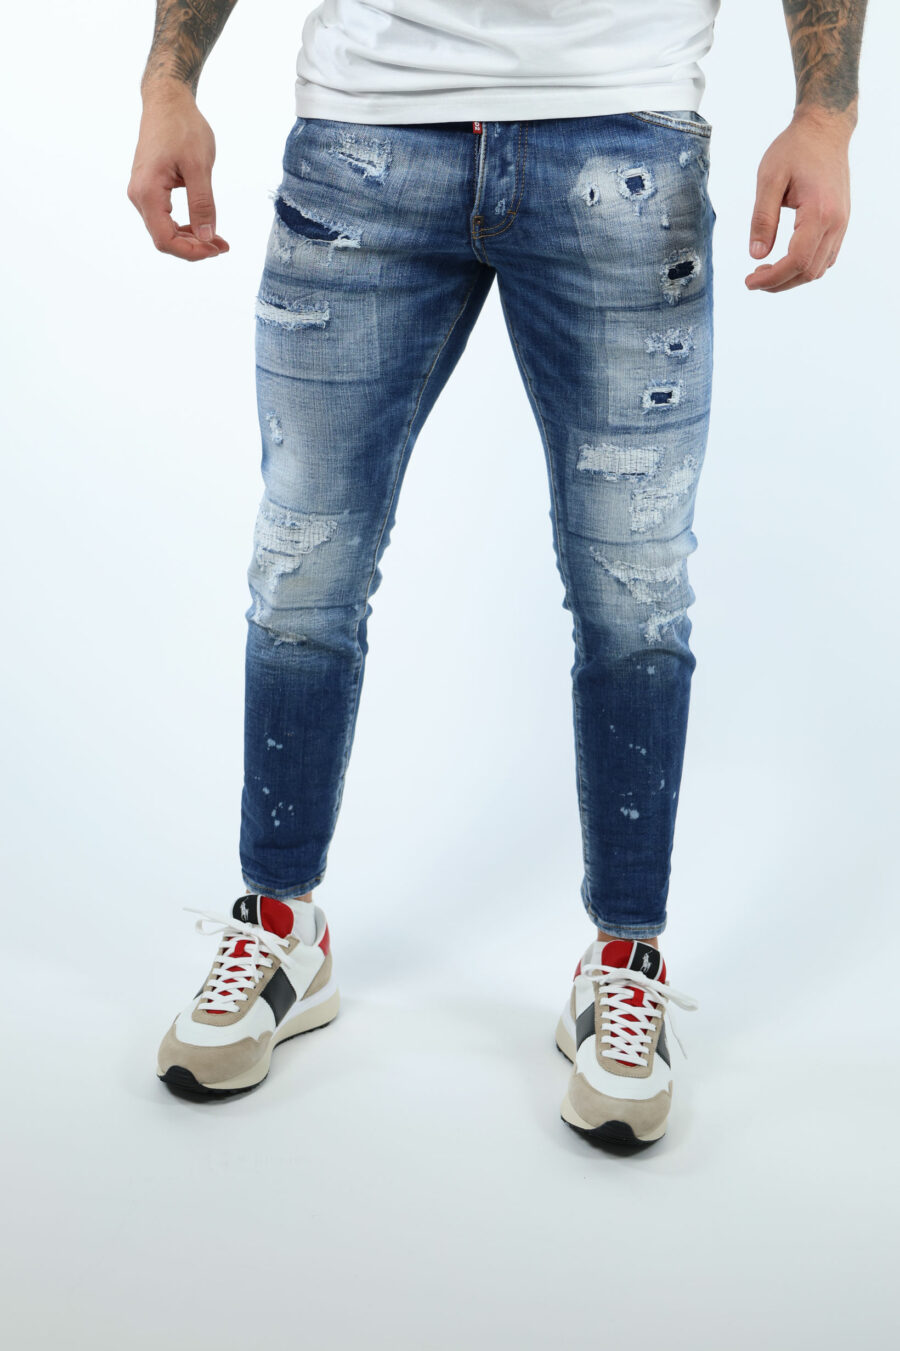 Light blue jeans "skater jean" with rips and frayed - 8054148338831 1